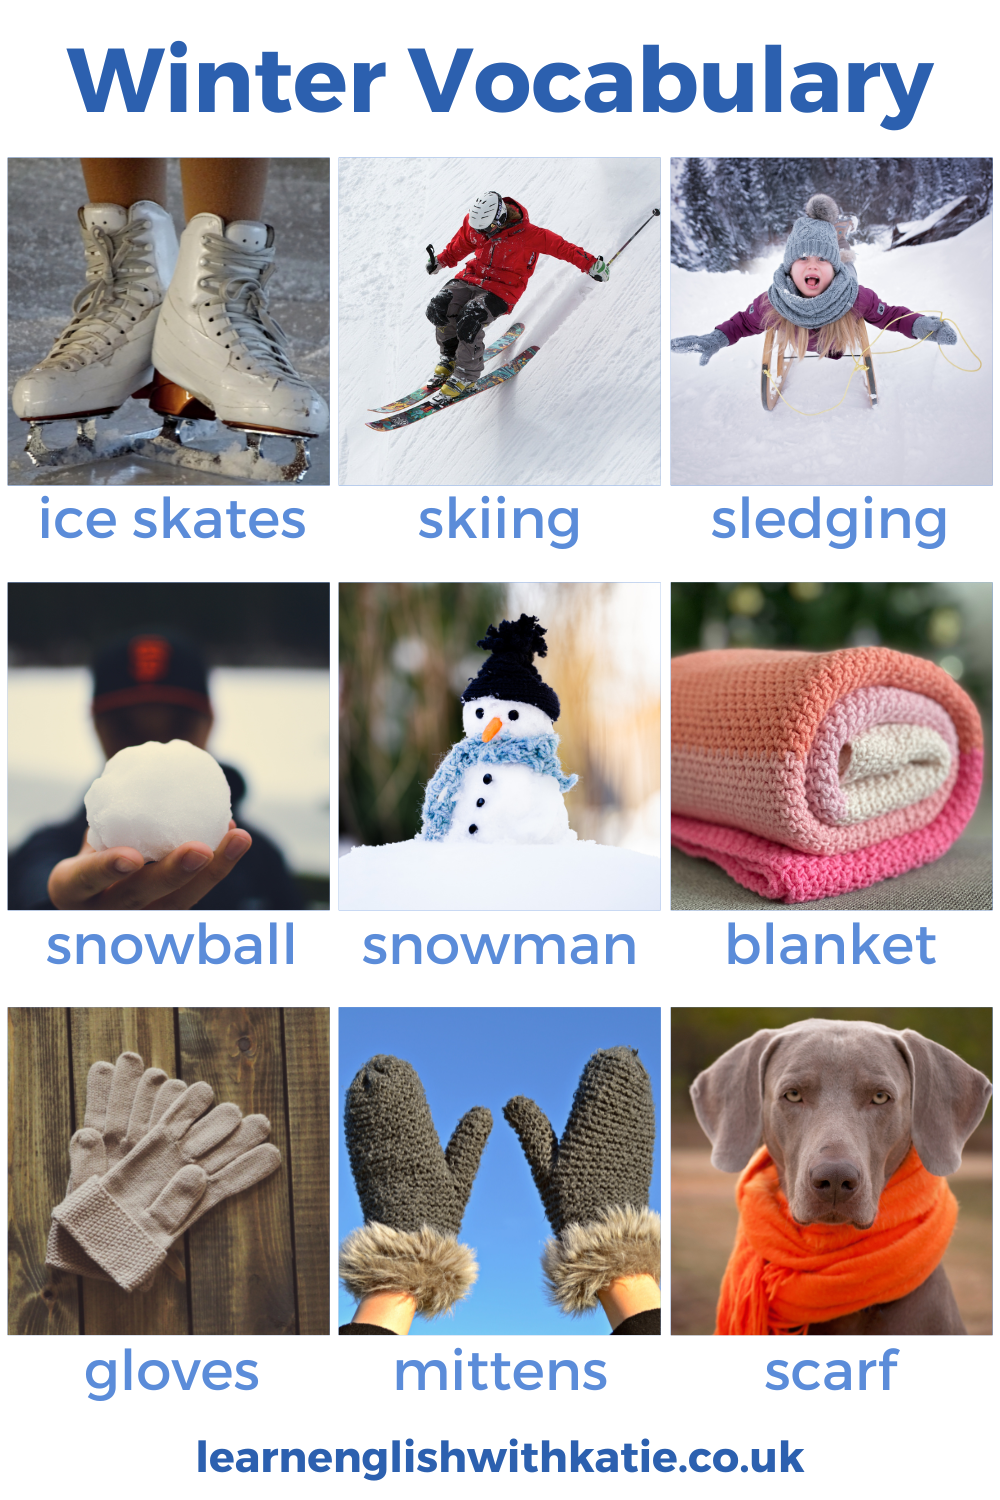 Pinterest pin showing picture dictionary for winter vocabulary.